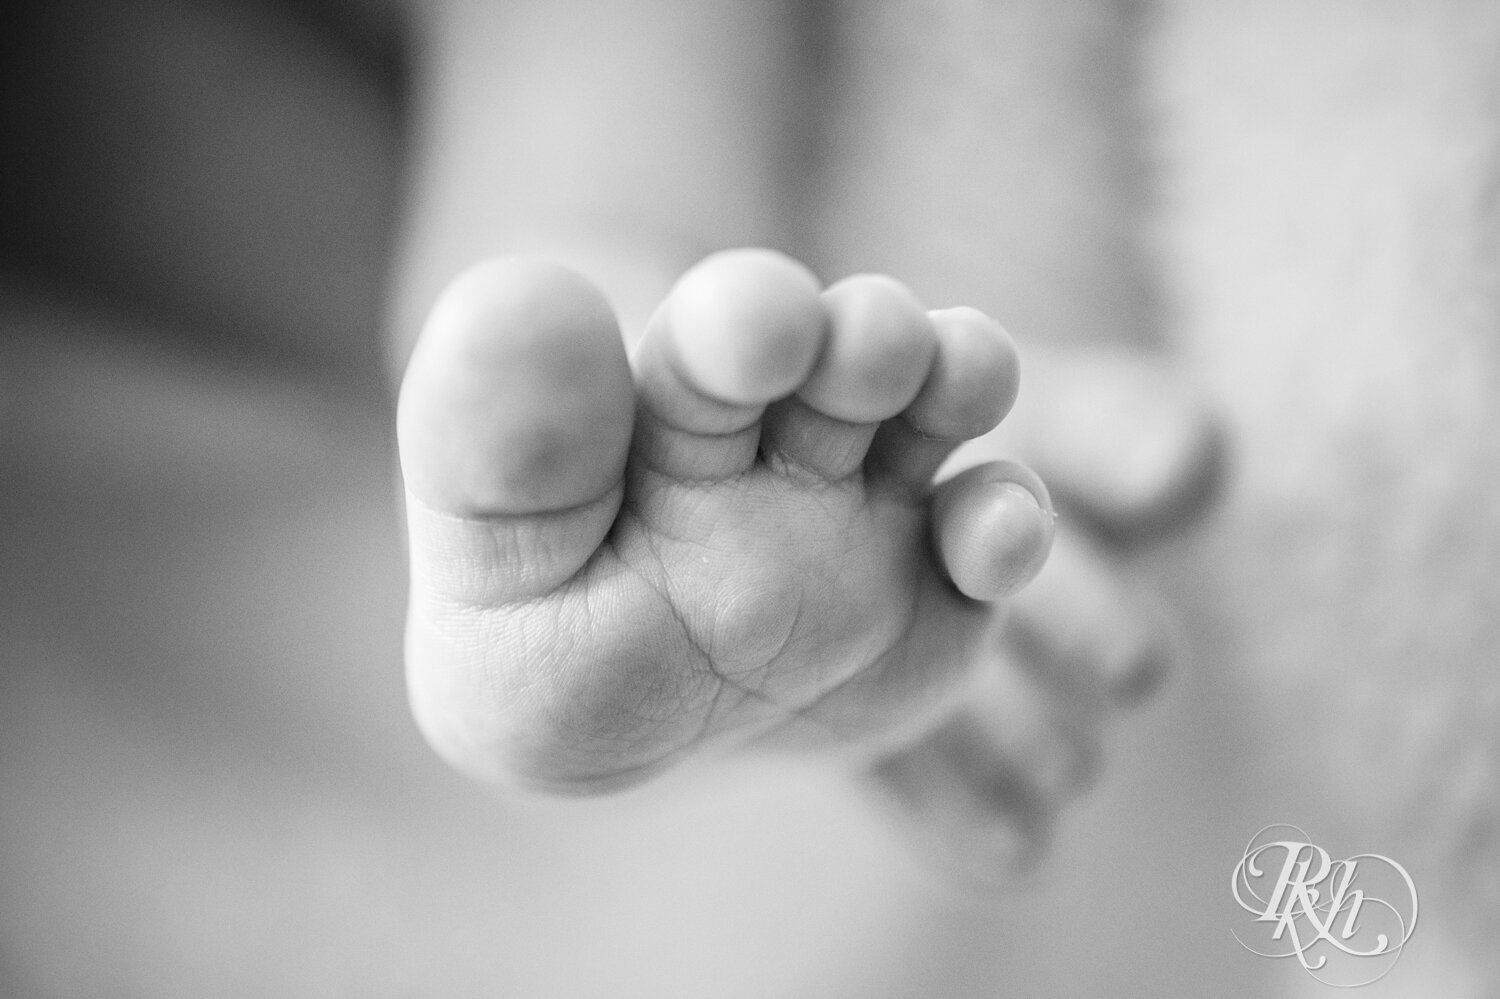 Black and white photo of baby toes.